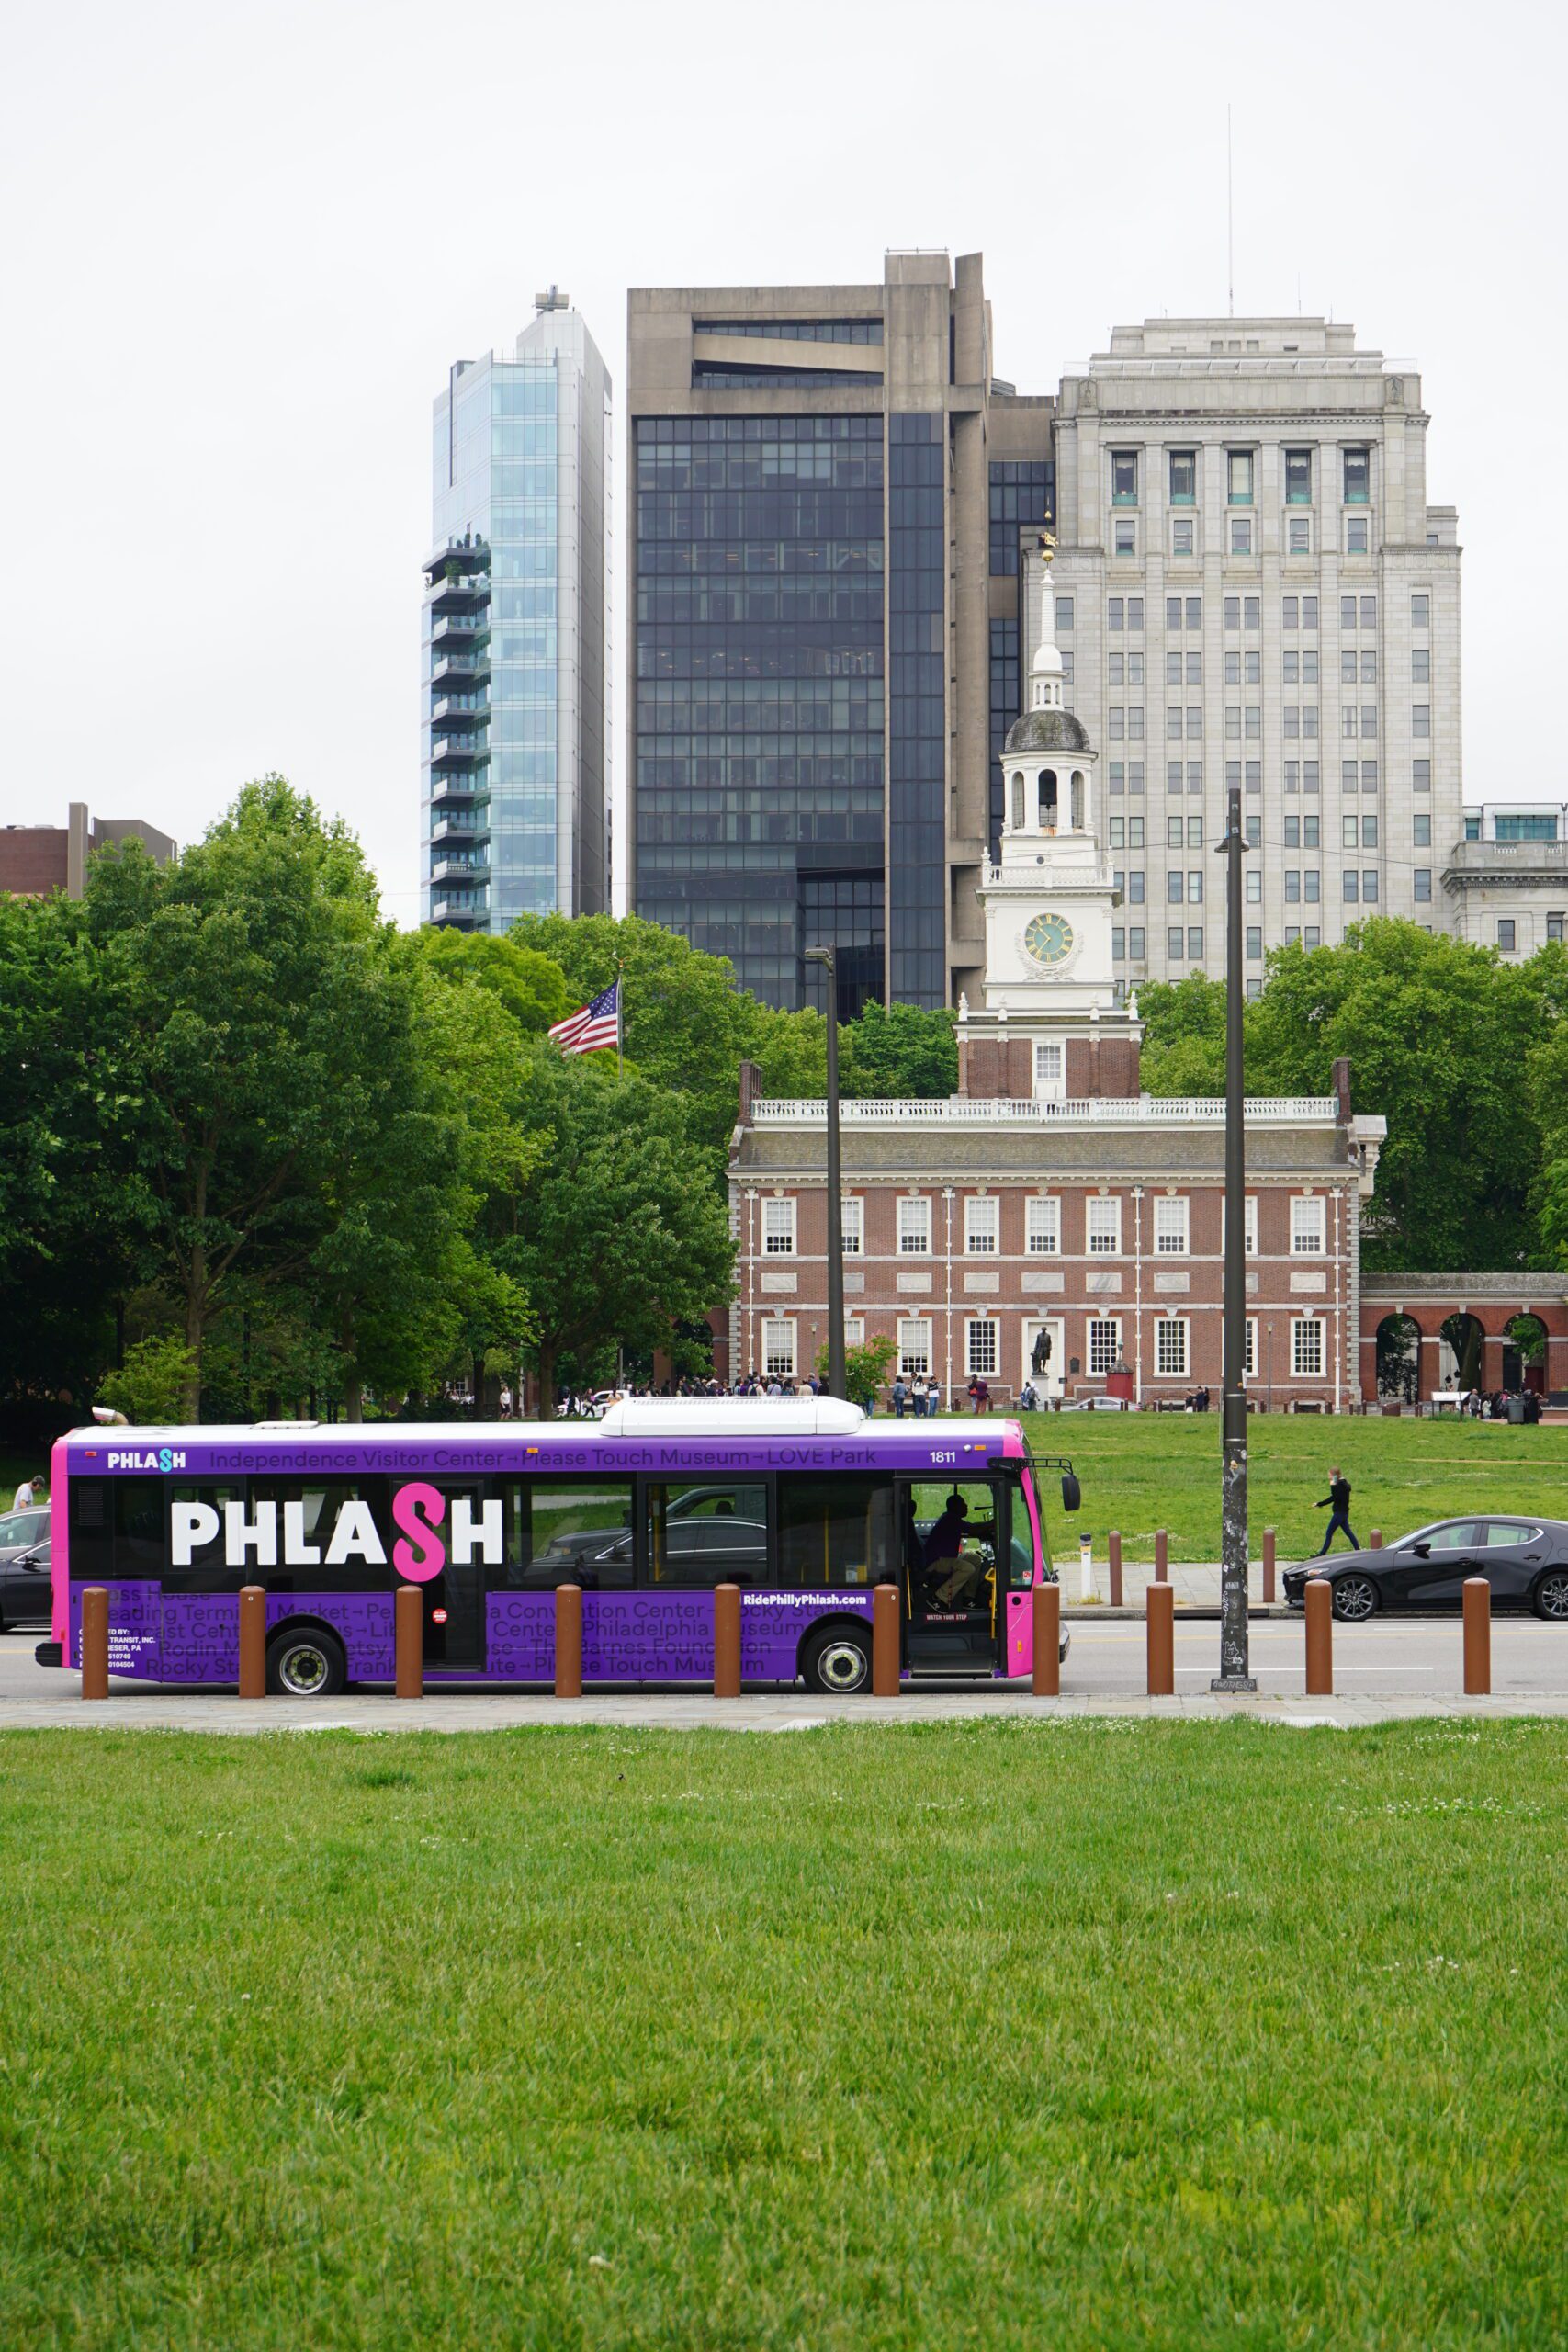 The Philly PHLASH bus in front of Independence Hall.